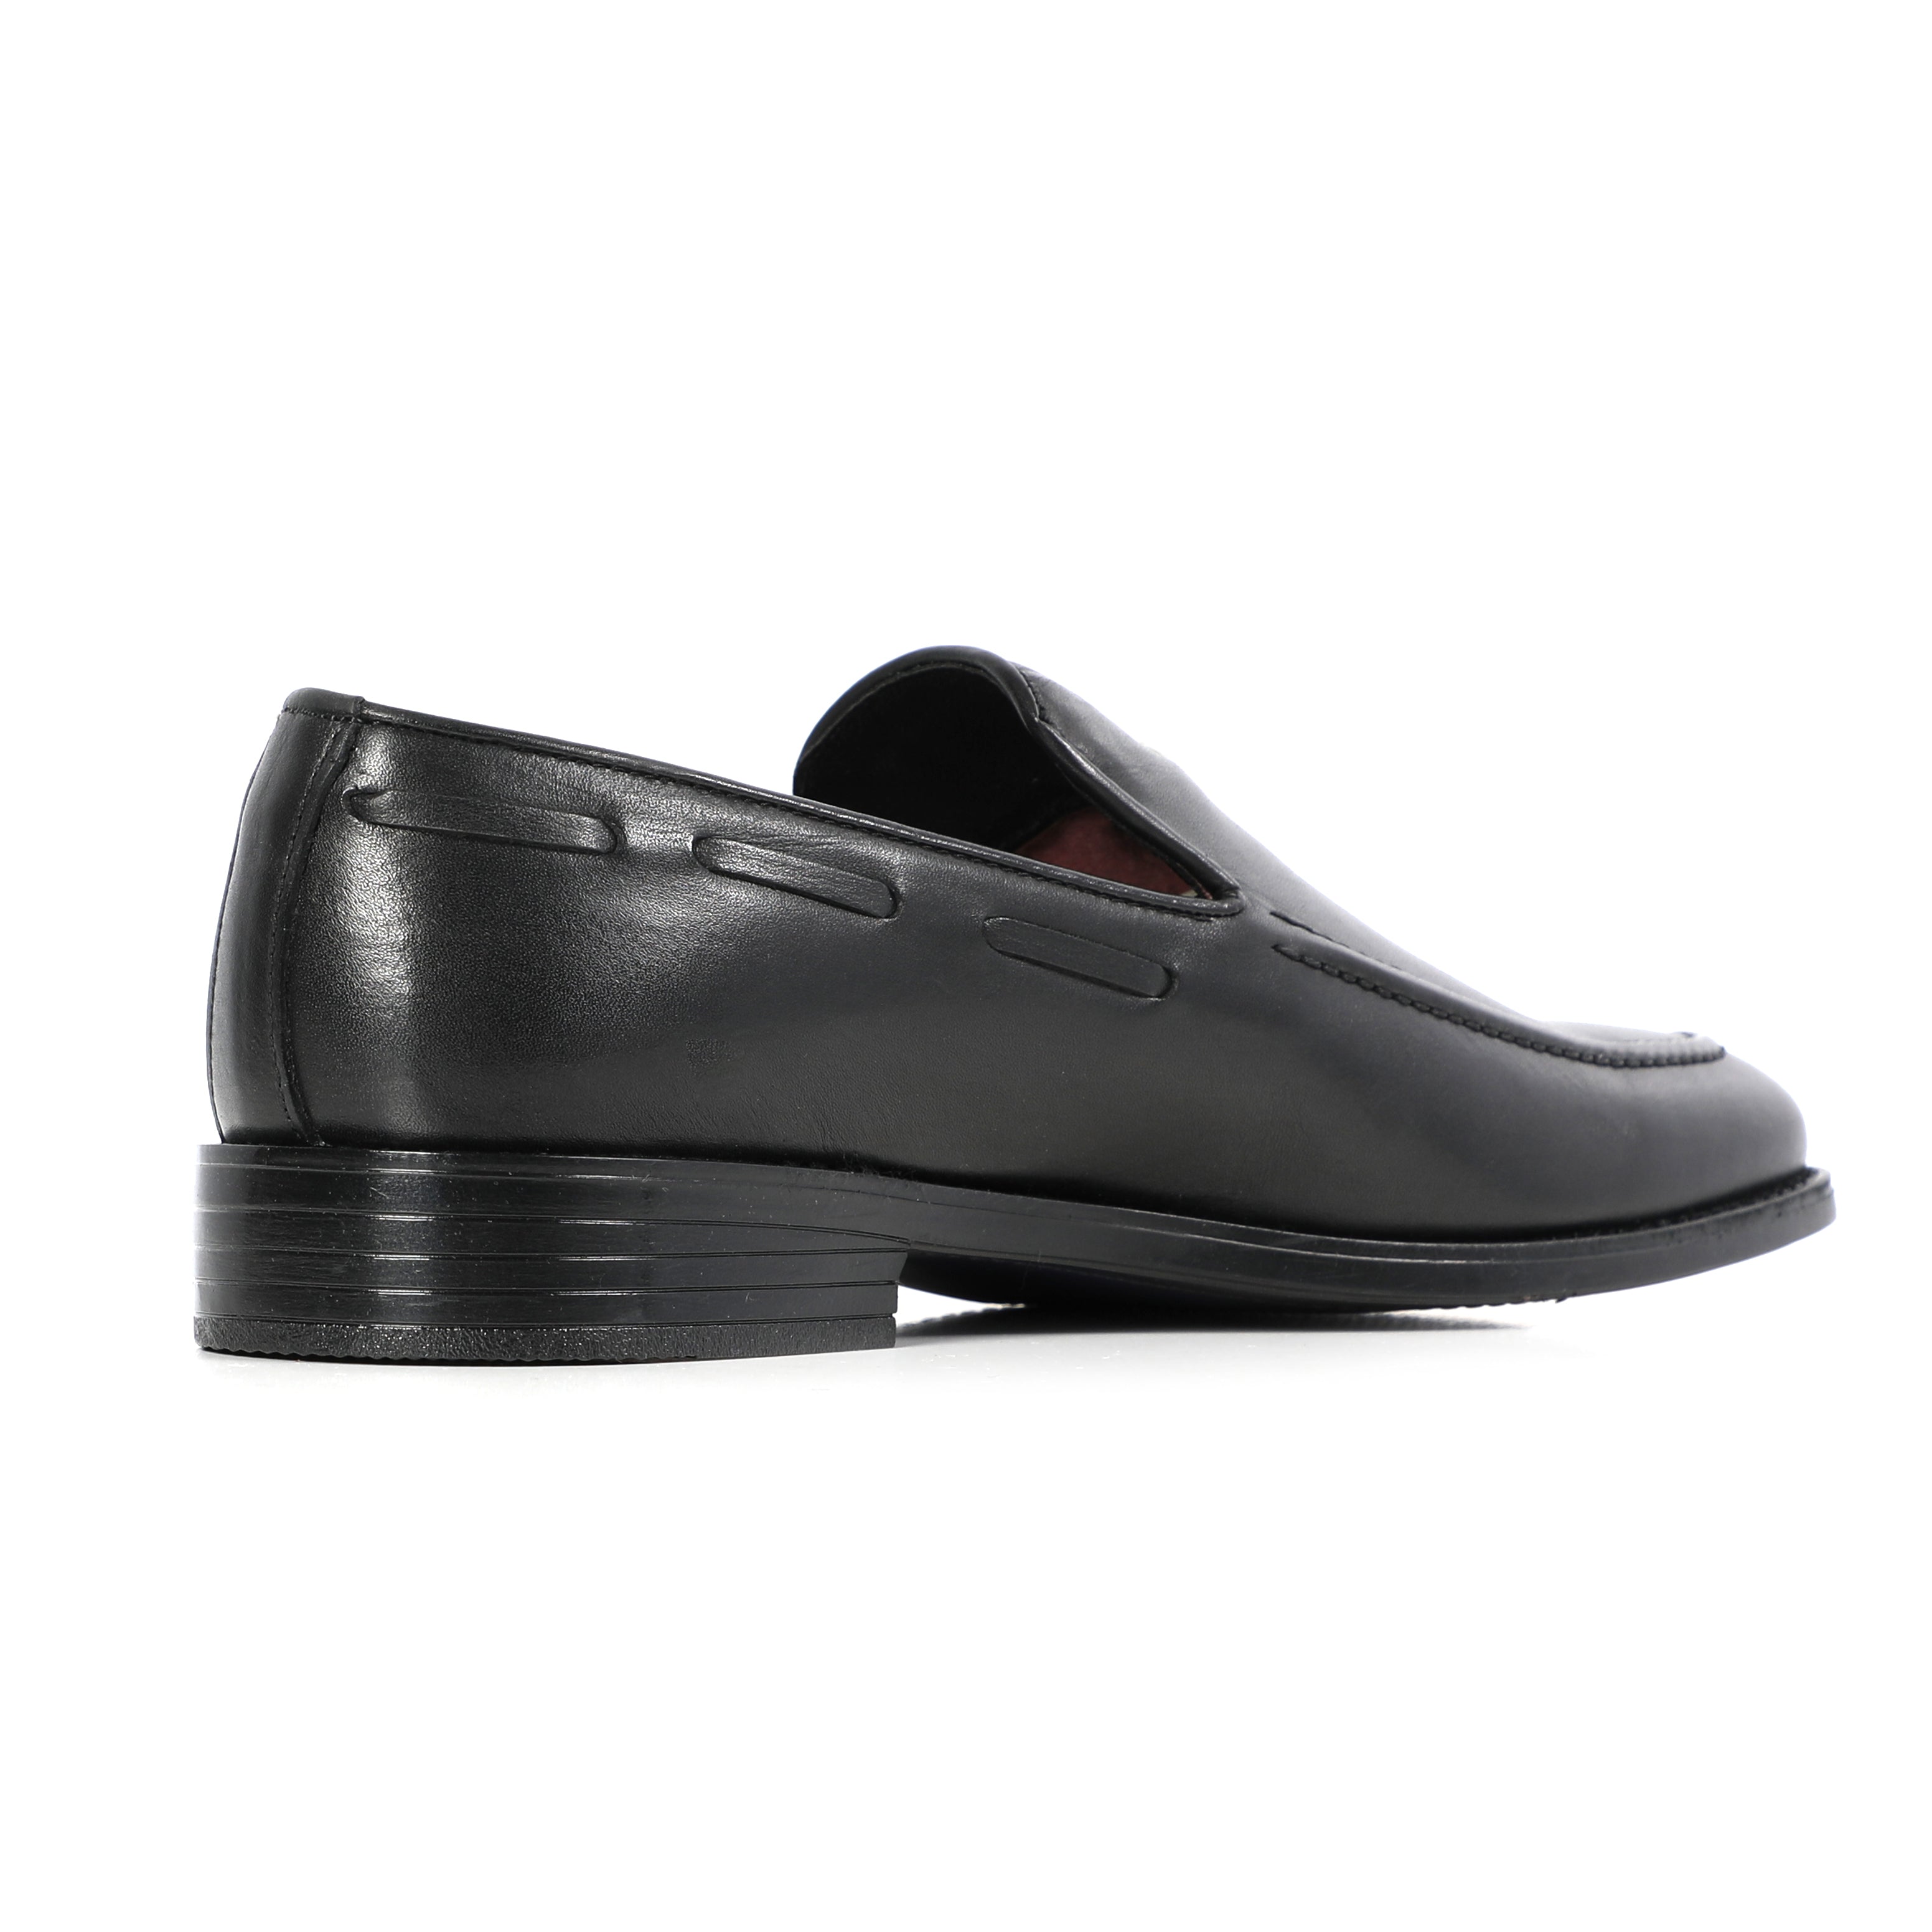 Classic Glossy Moccasin Shoes With Design On Top